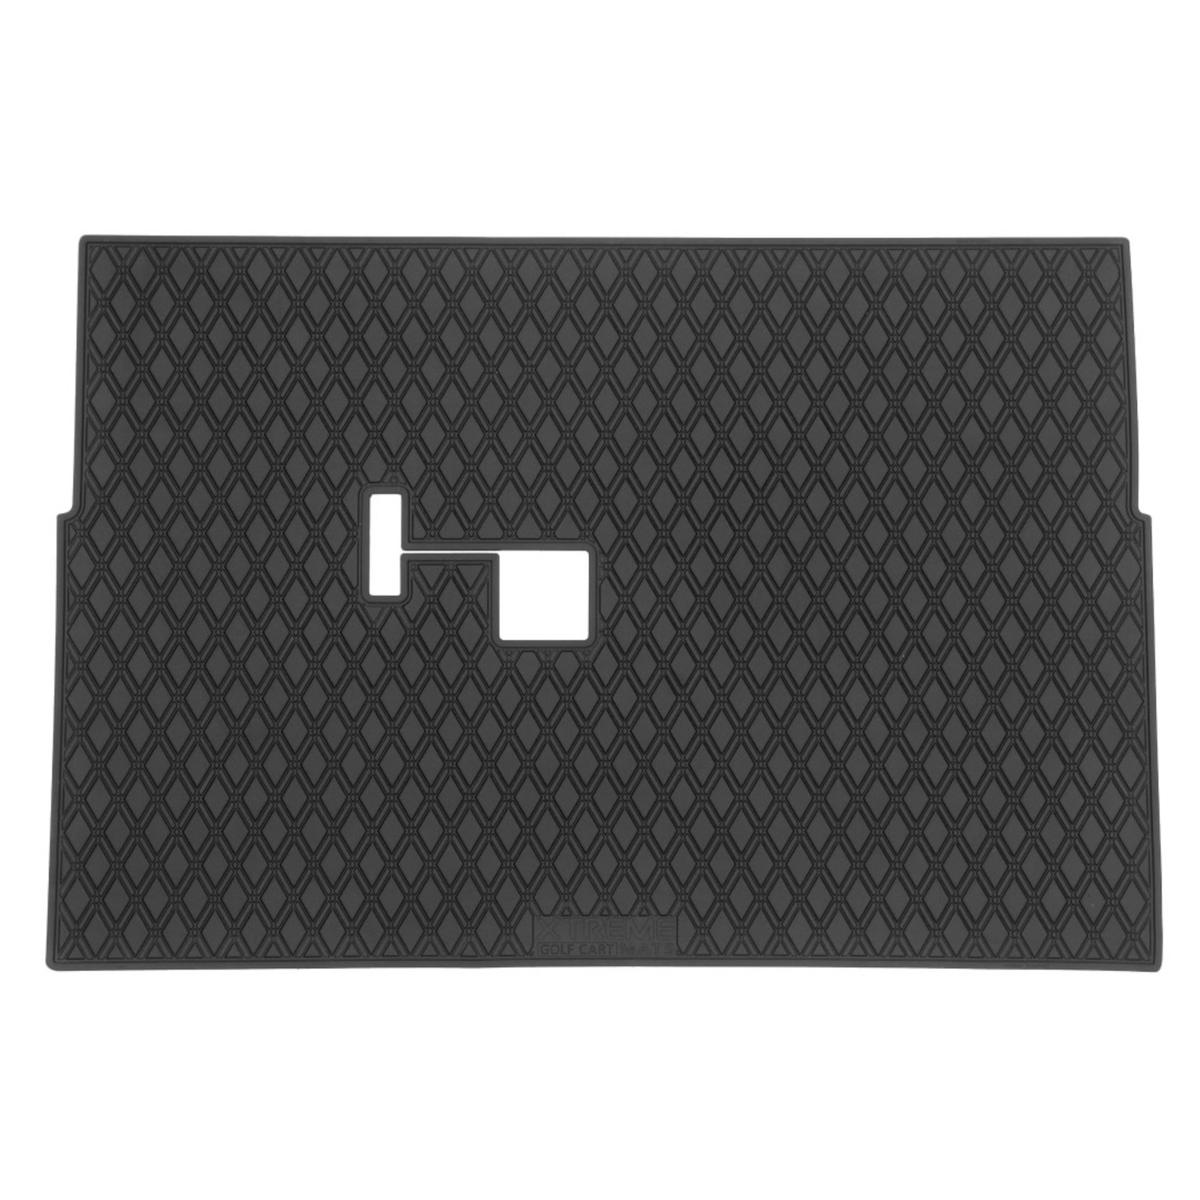 Xtreme Floor Mats for Club Car DS (82-13) / Villager (82-18) - All Black